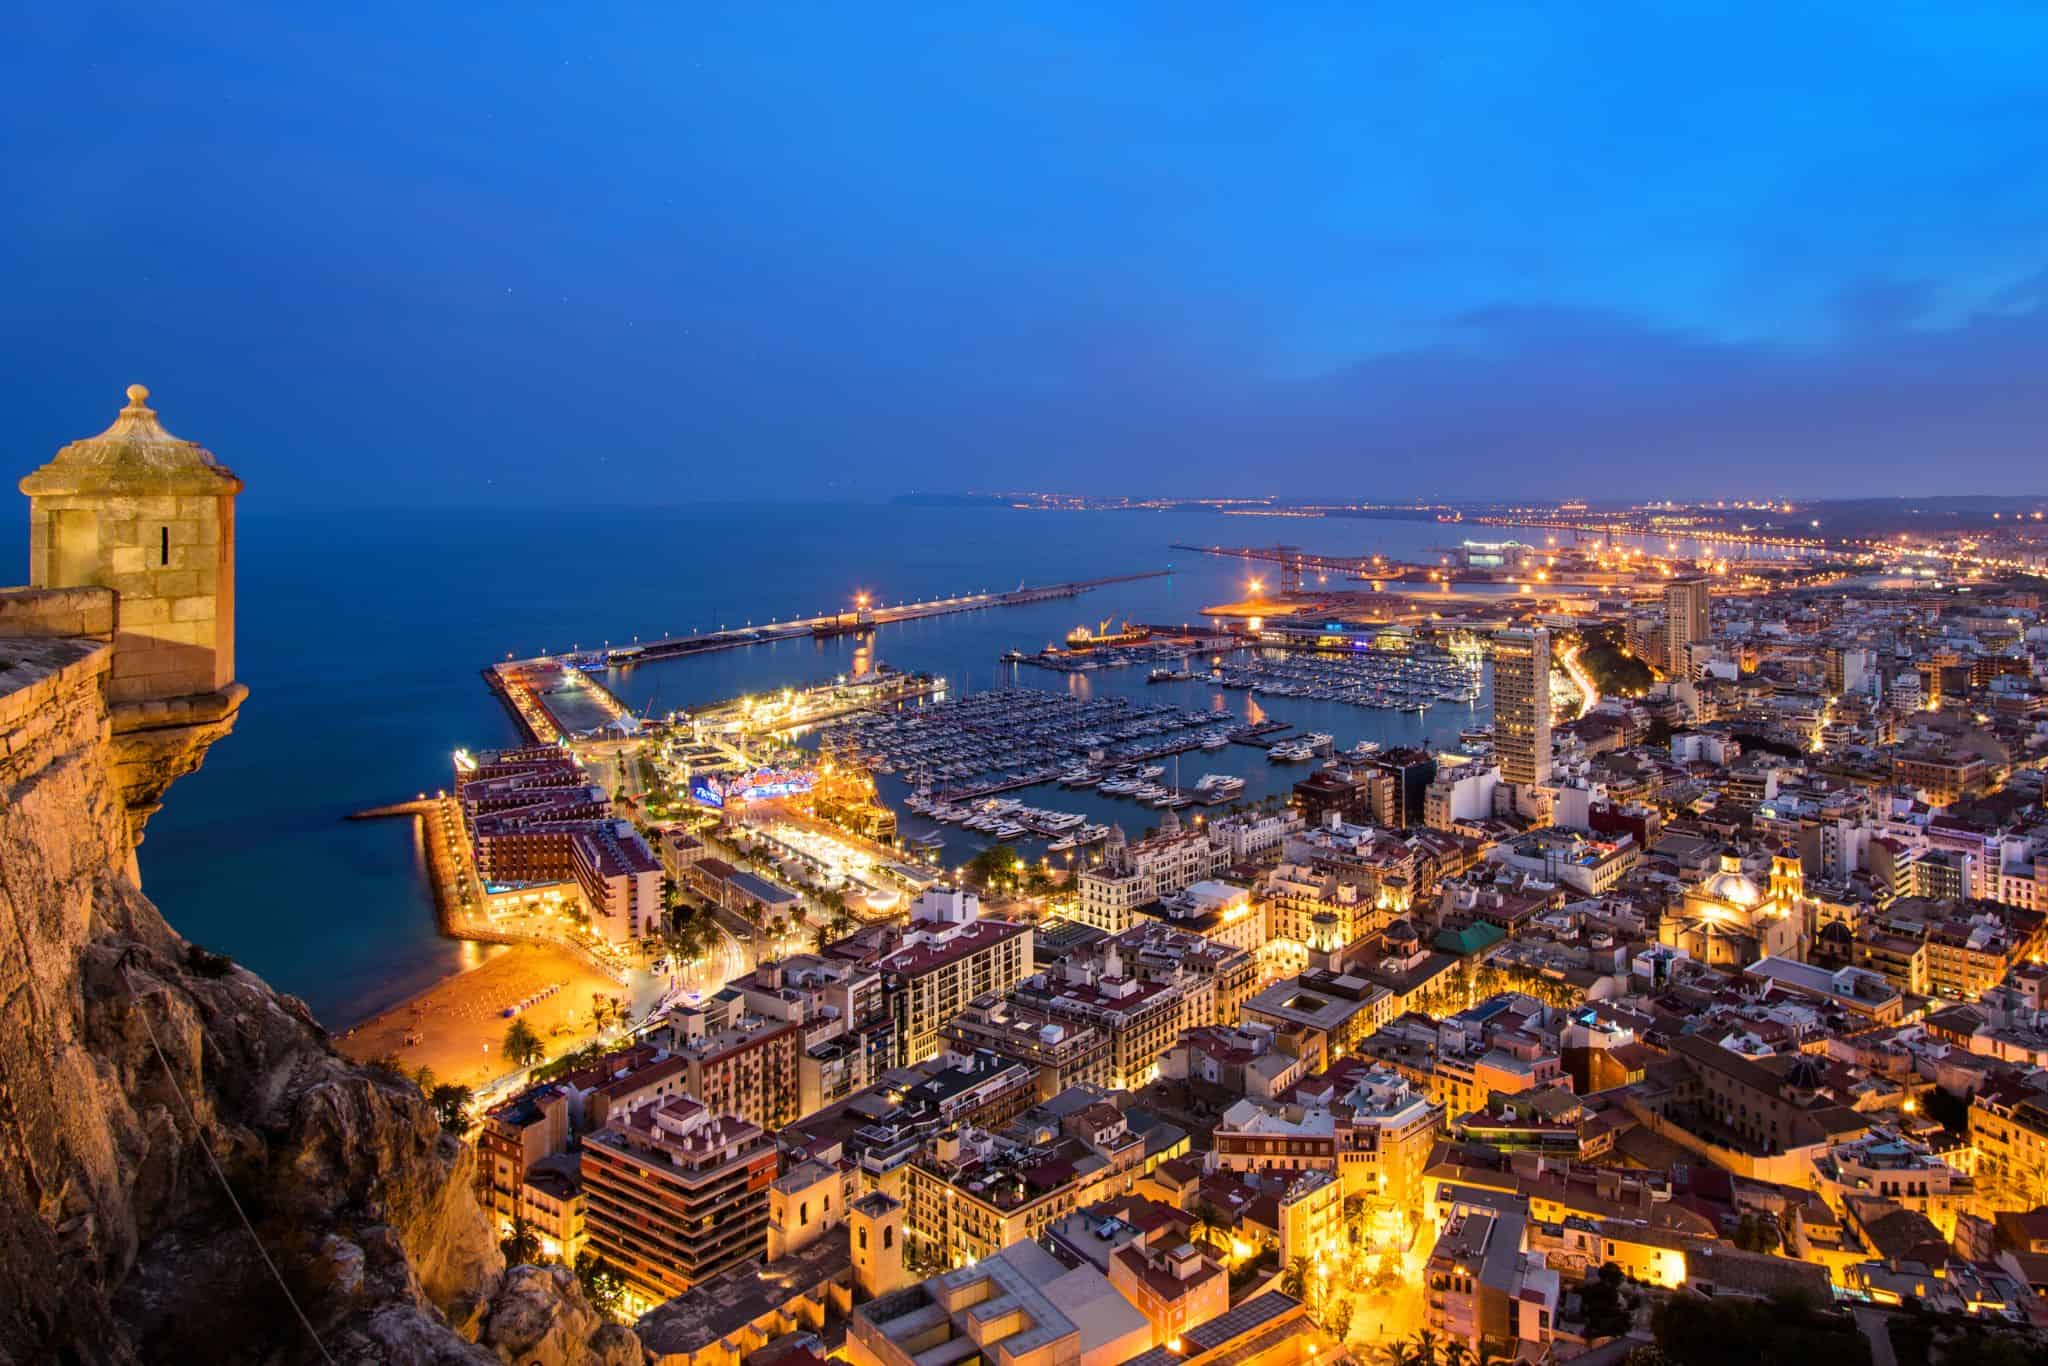 Alicante Spain night view from the castle